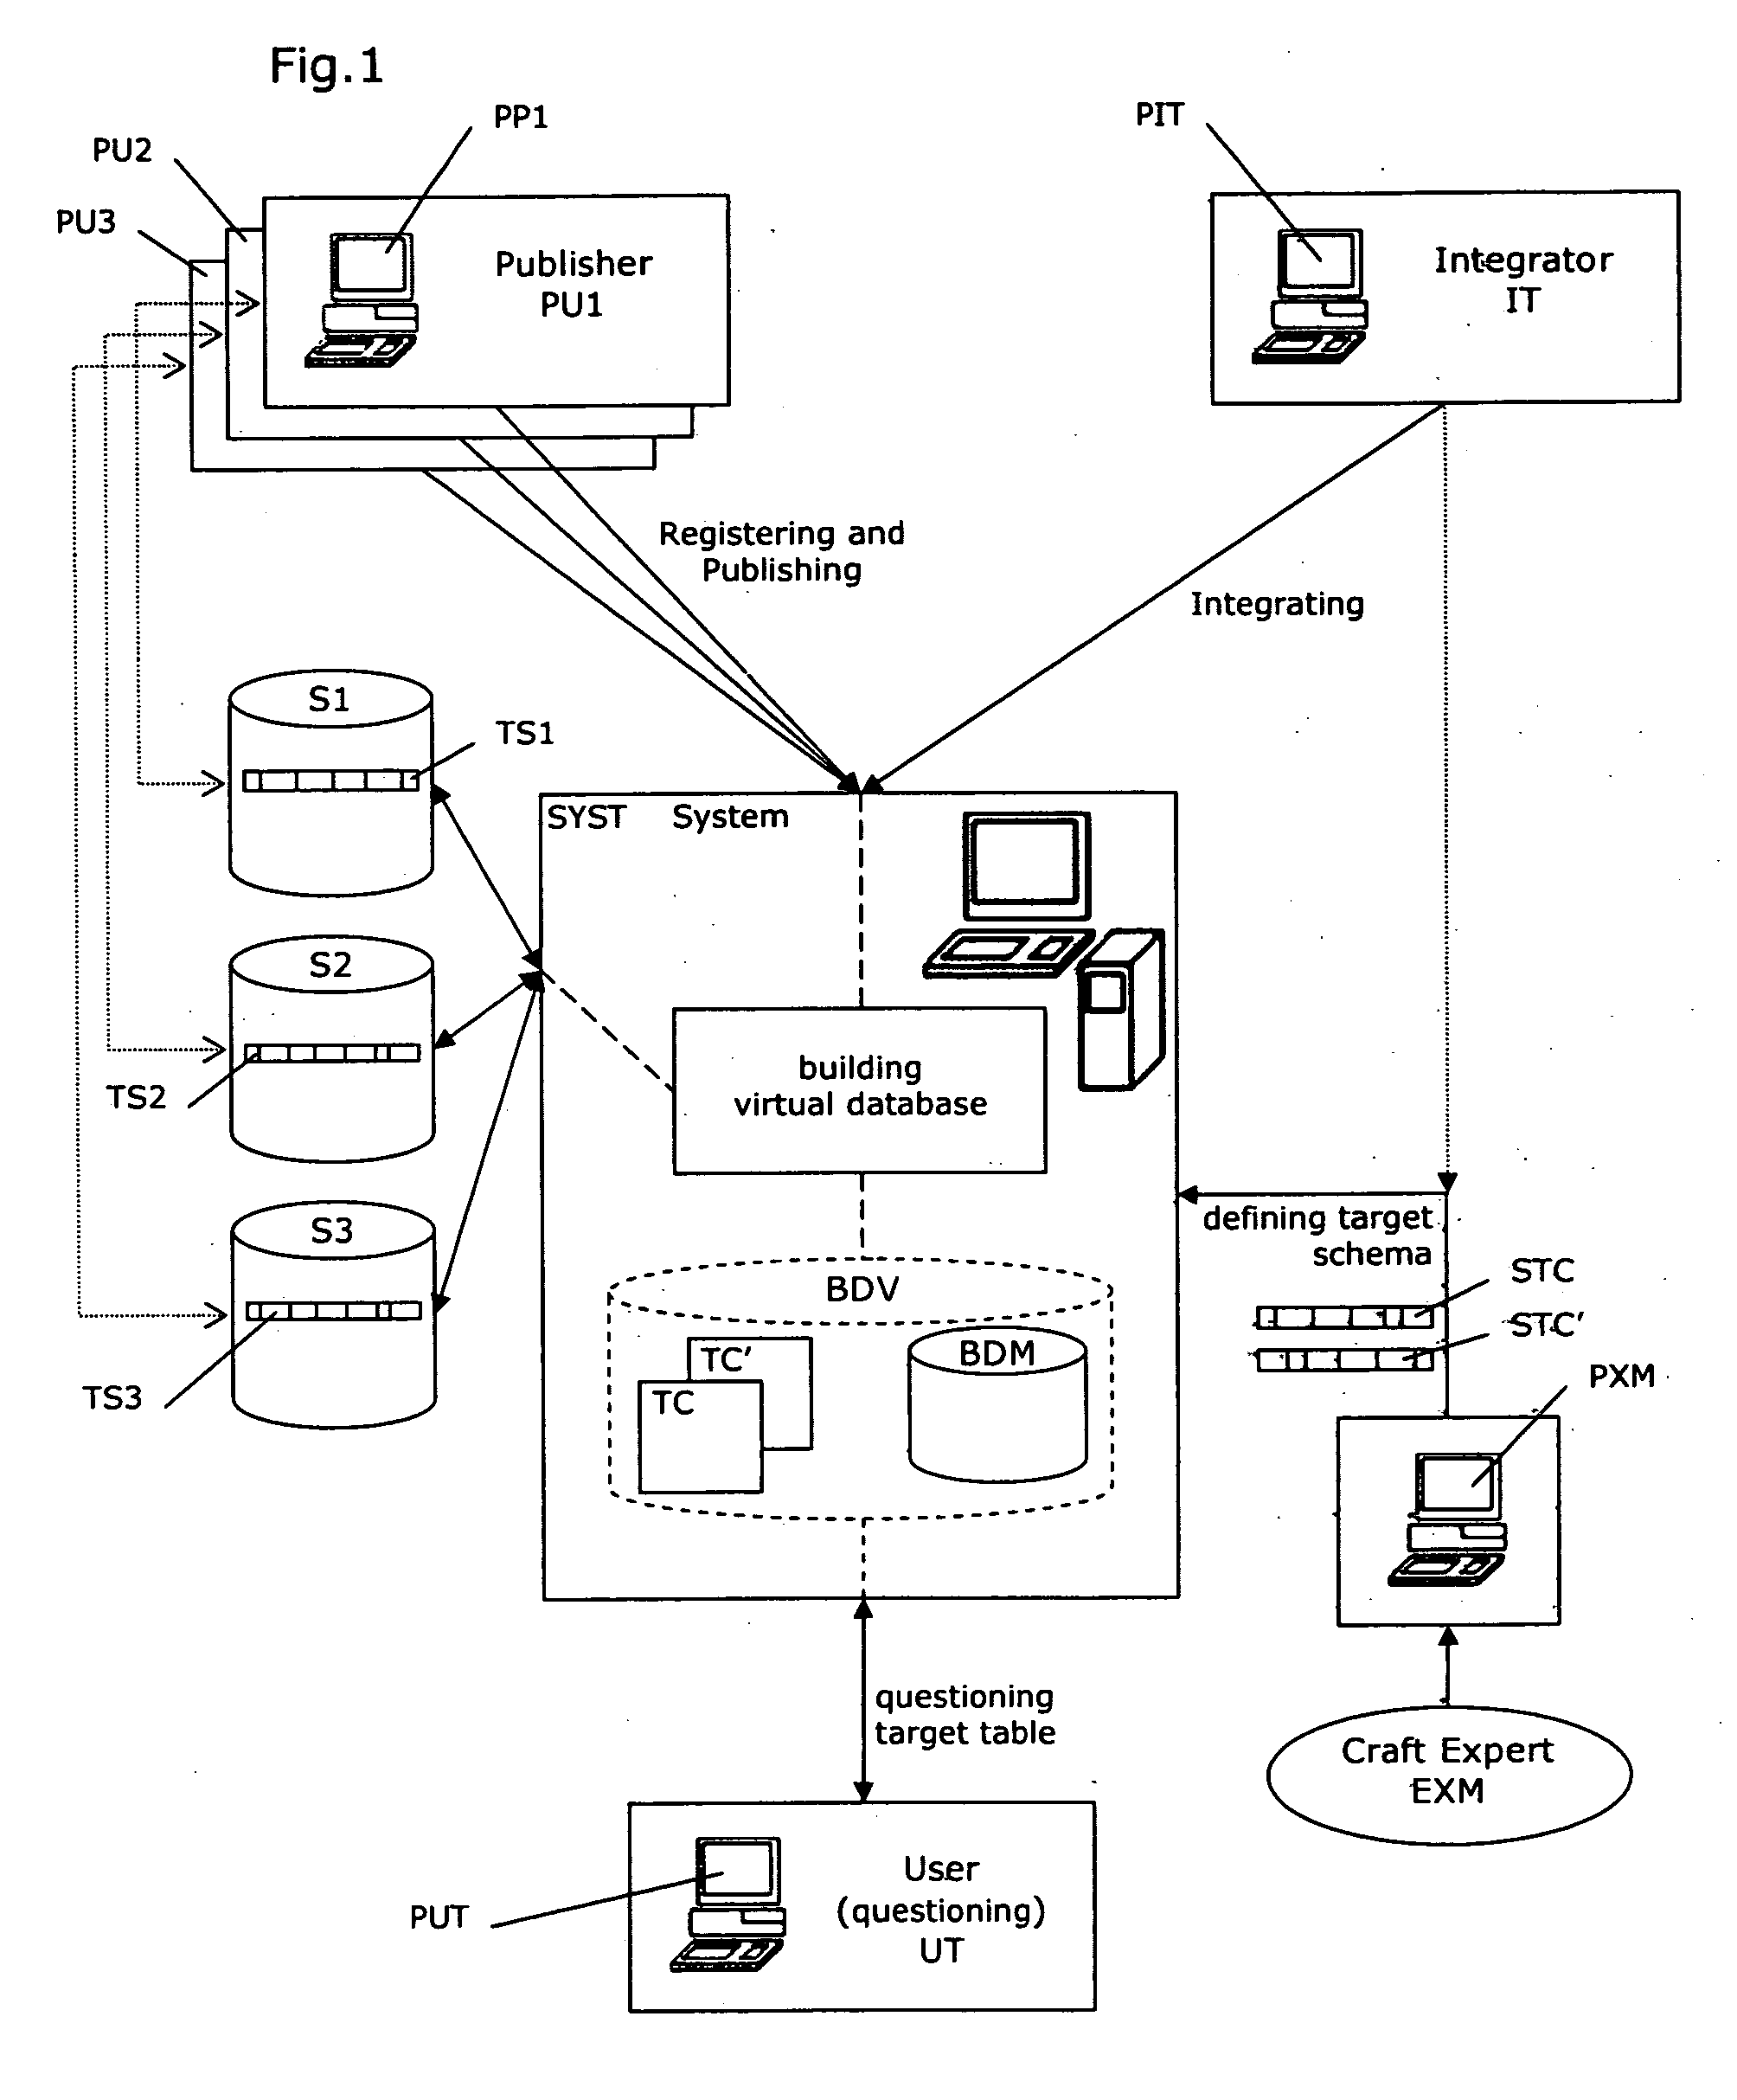 Apparatus and method for producing a virtual database from data sources exhibiting heterogeneous schemas